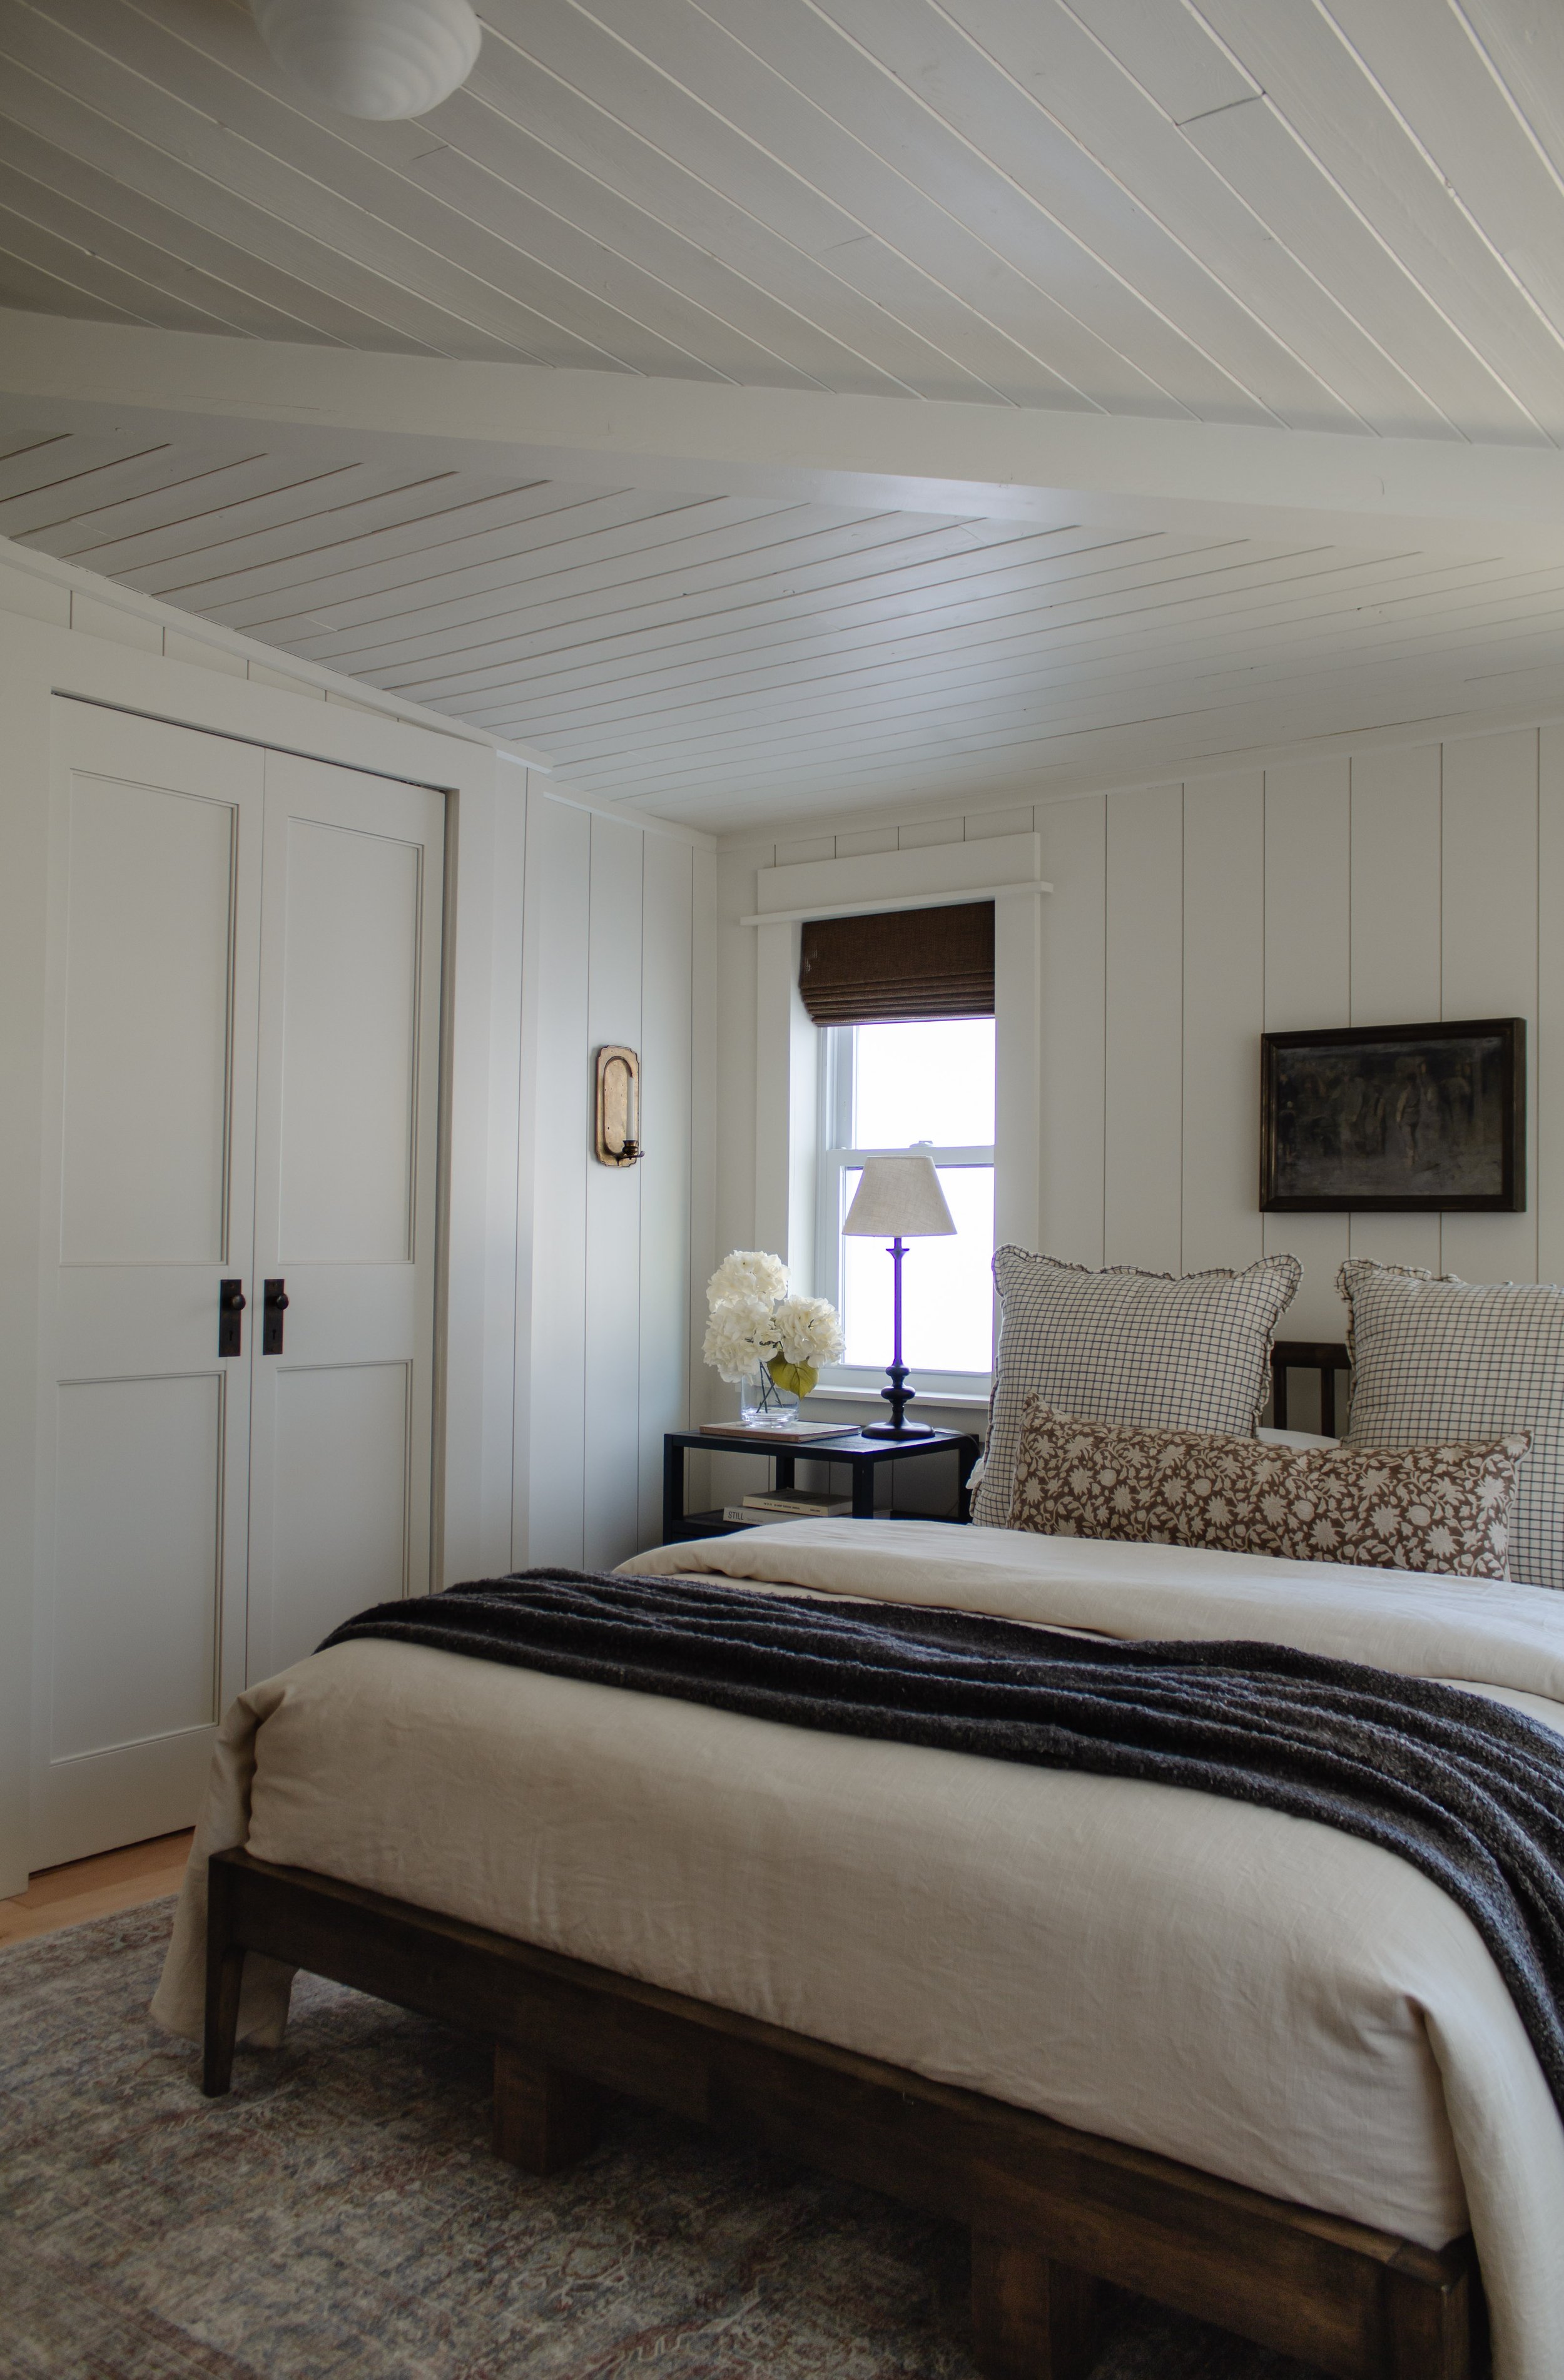 Primary bedroom remodel and makeover. How we turned our tiny bedroom with low ceilings into a cabin oasis. Wood plank ceiling. Vertical shiplap vertical plank walls. Cabin bedroom. California casual bedroom. Bifold door makeover. Nadine Stay